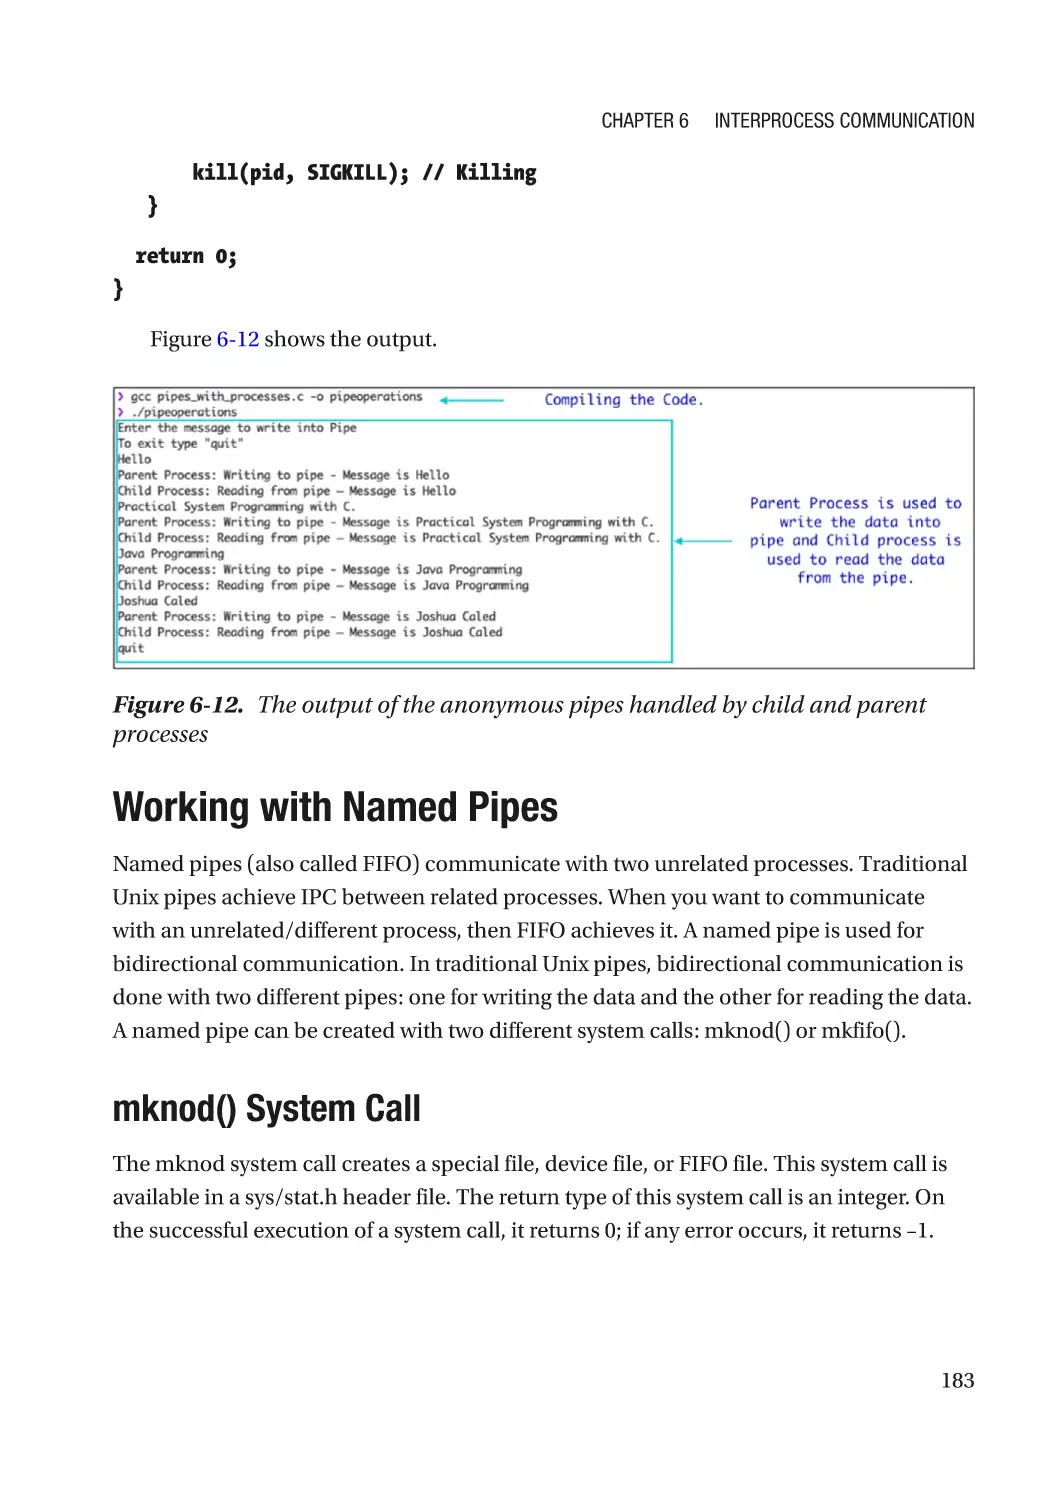 Working with Named Pipes
mknod() System Call